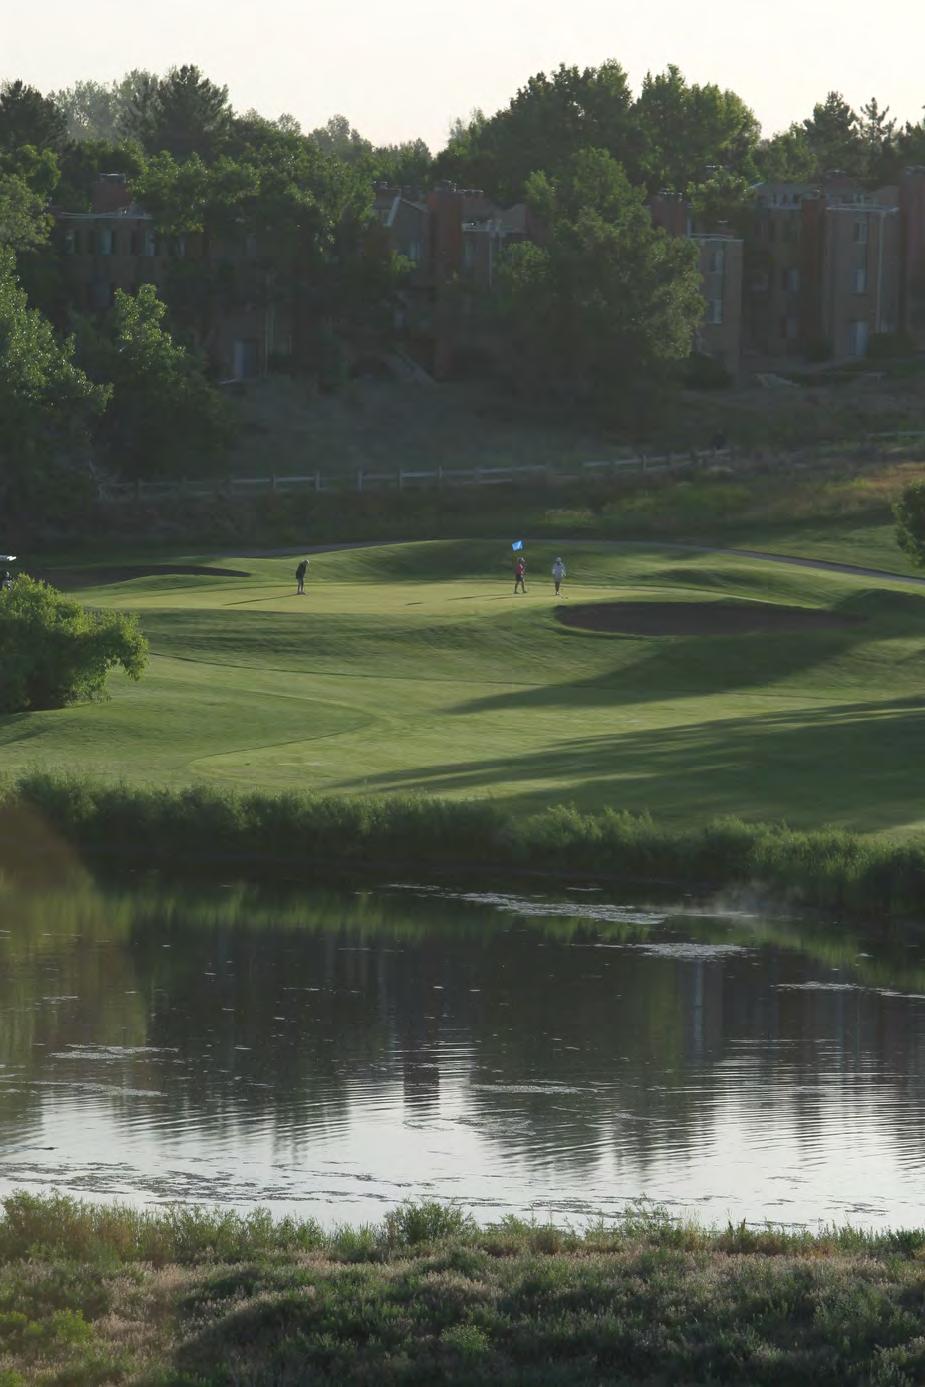 This course has variety with 27-holes of regulation golf or nine-holes of par 3